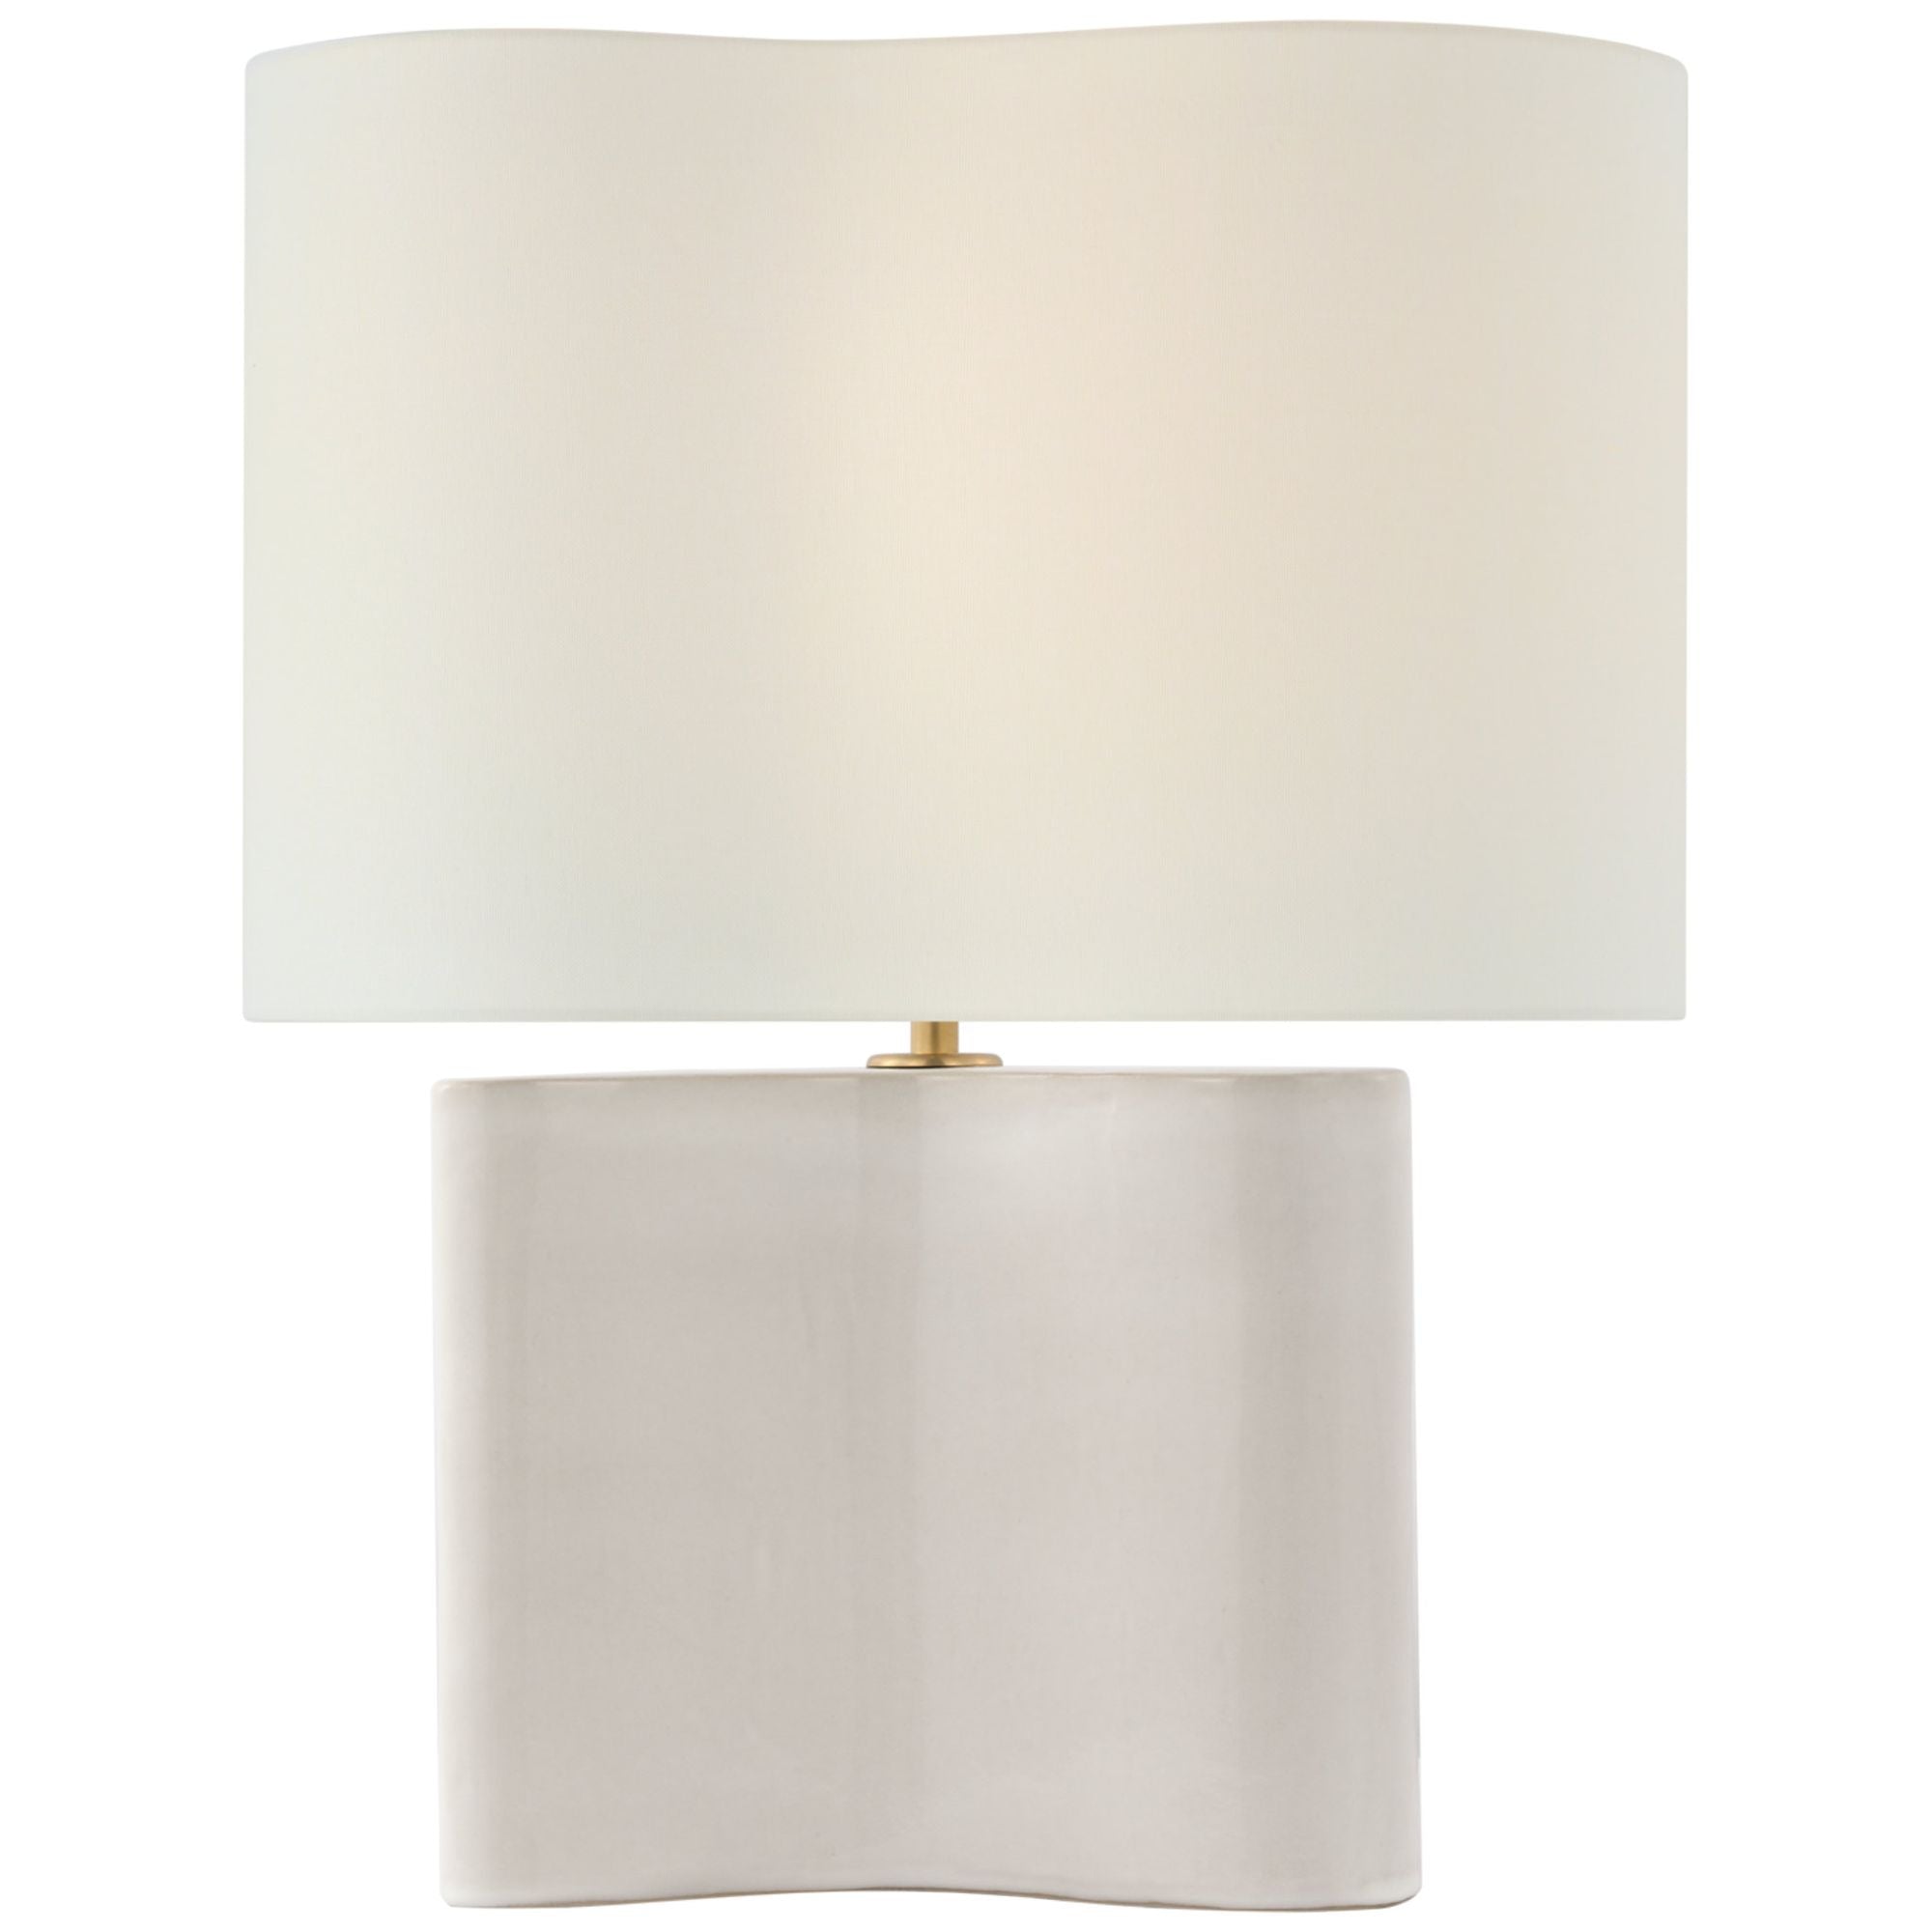 AERIN Mishca Medium Table Lamp in Ivory with Linen Shade